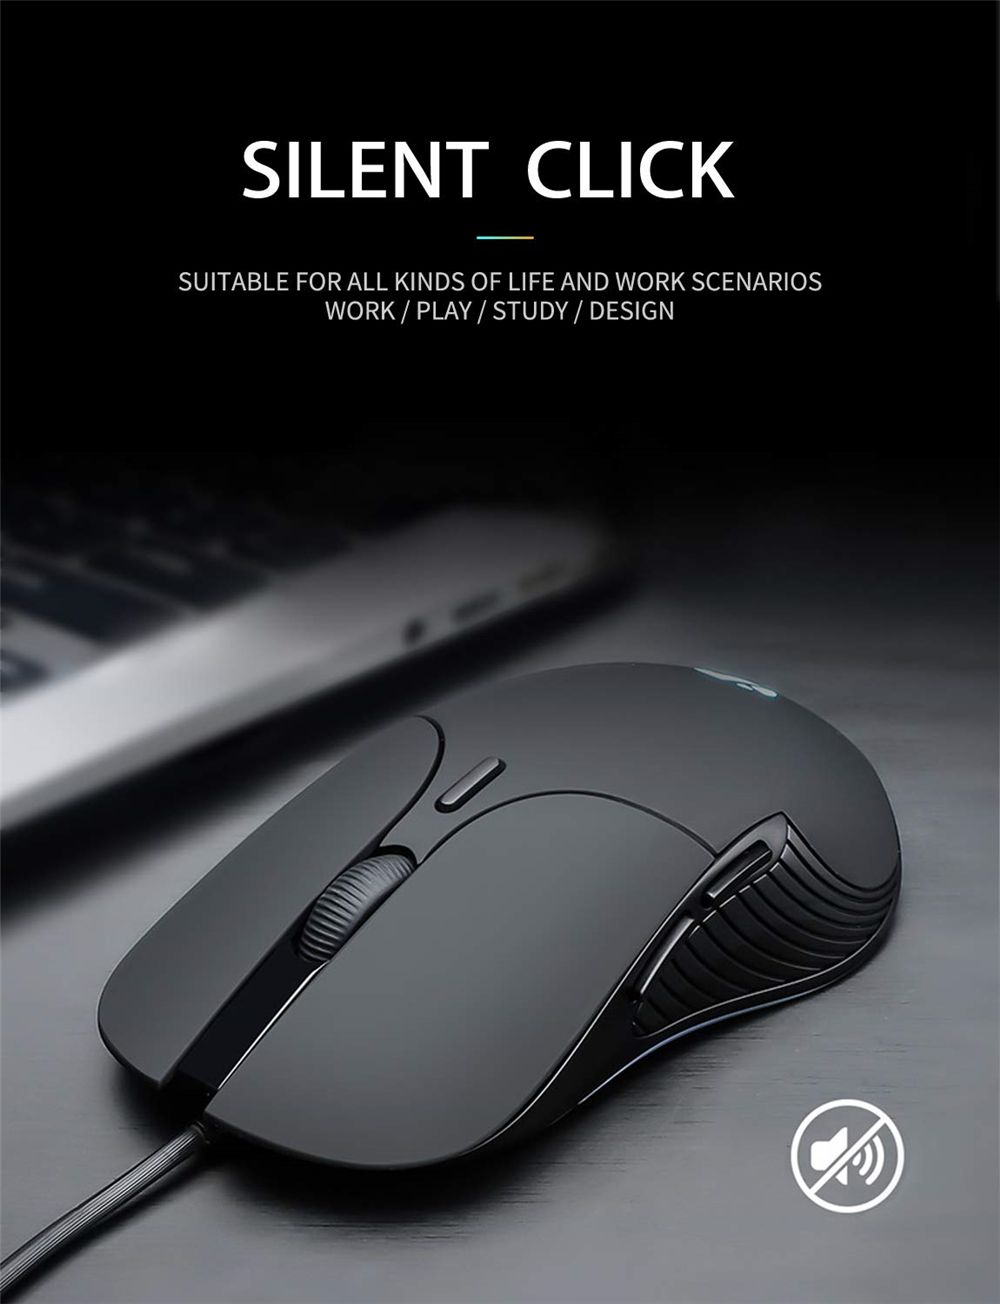 Inphic-PB1-Wired-Gaming-Mouse-4-Buttons-Business-Silent-Mouse-6-Buttons-Gaming-Mouse-Mute-Button-Opt-1739155